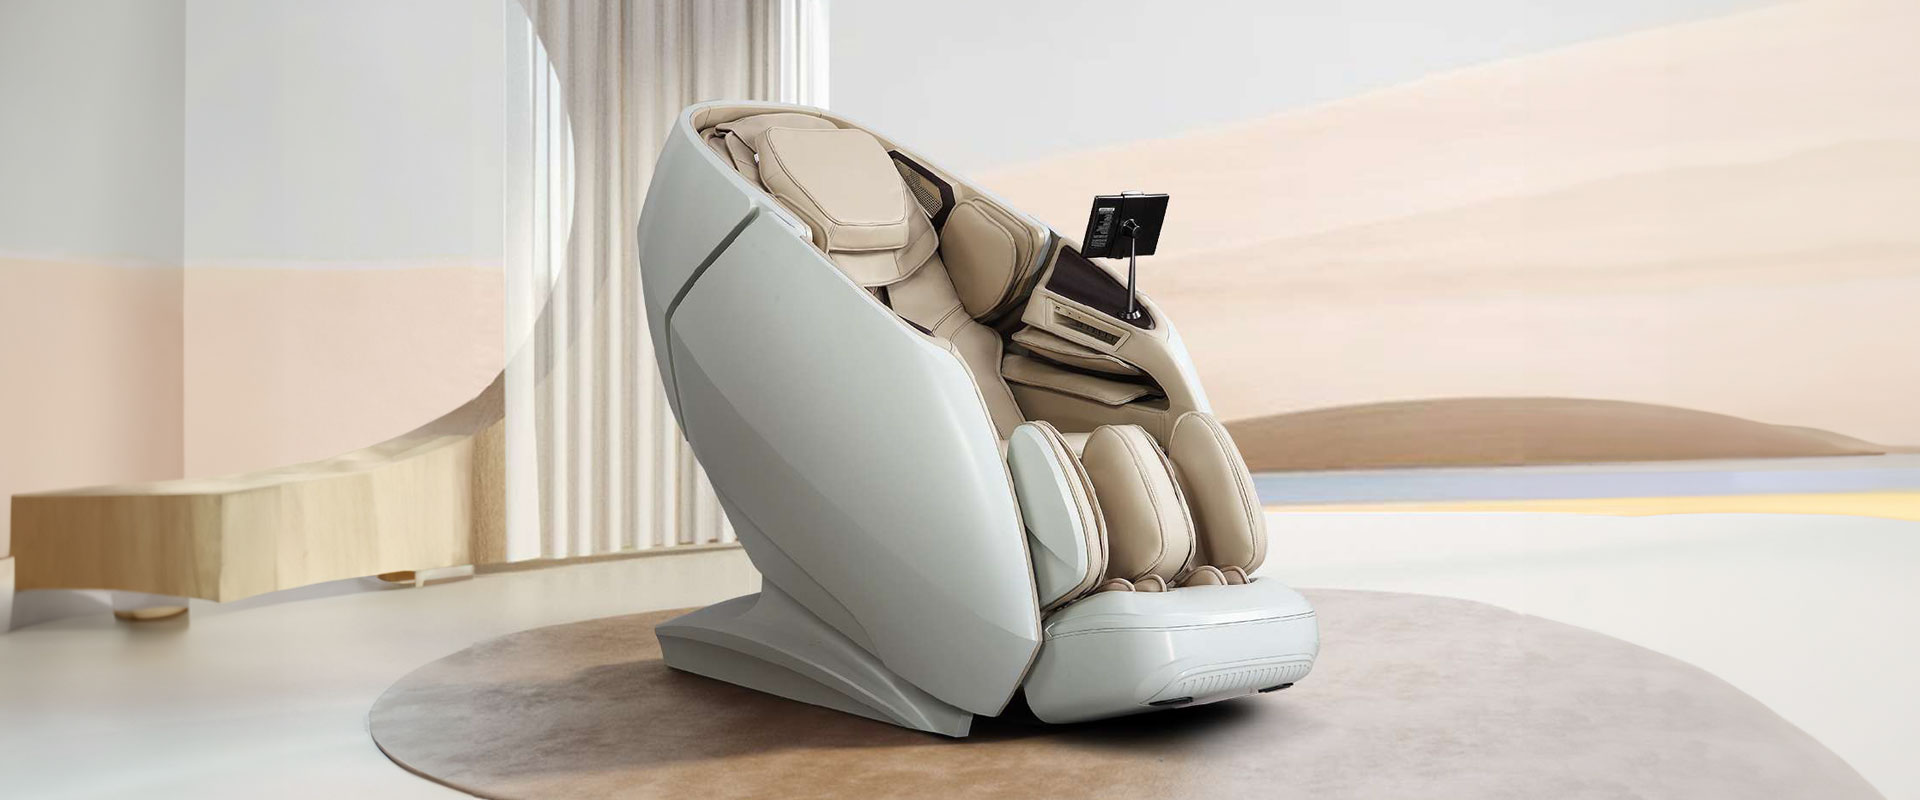 best selling massage chair